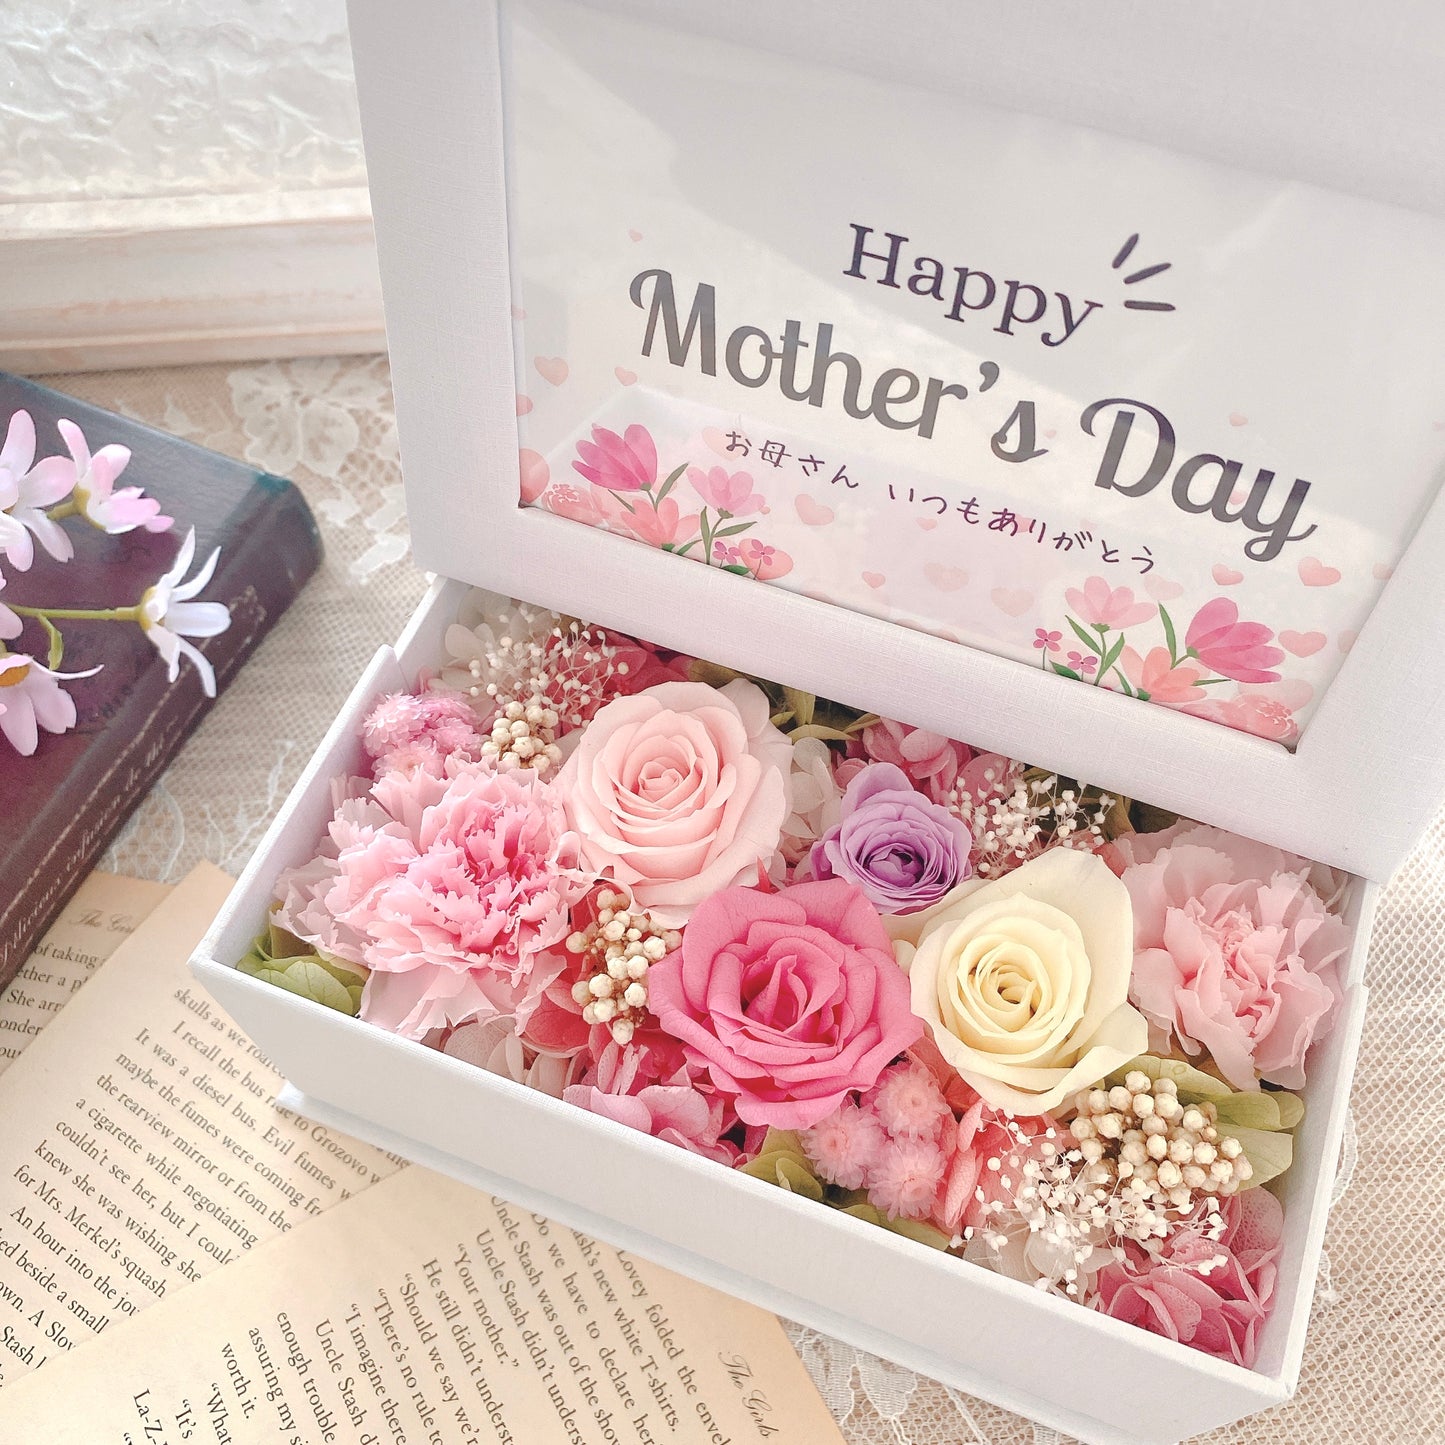 Photoframe for Mother's day